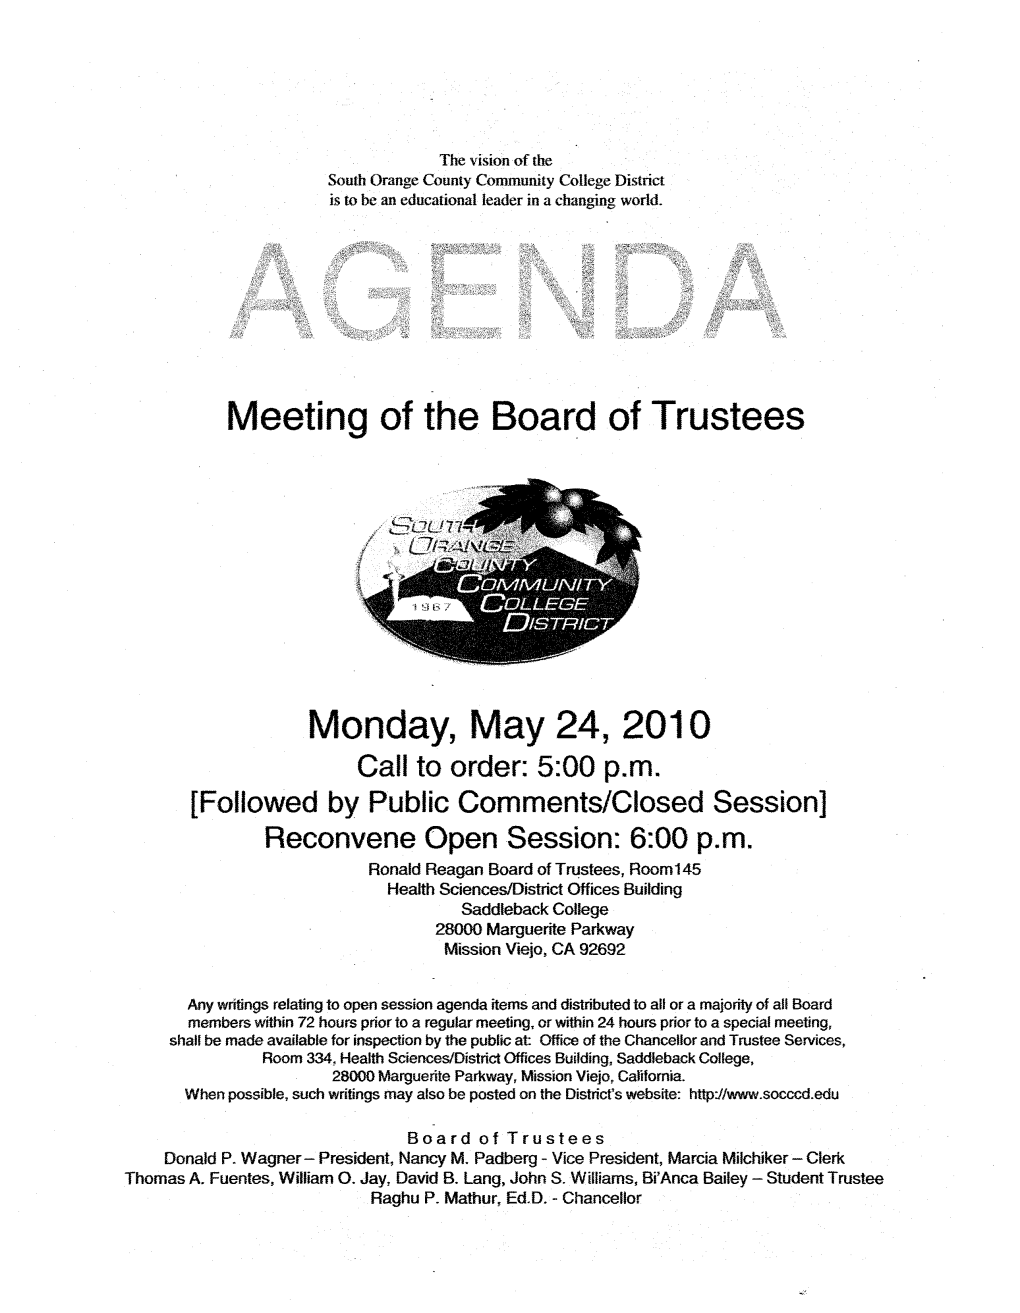 Meeting of the Board of Trustees